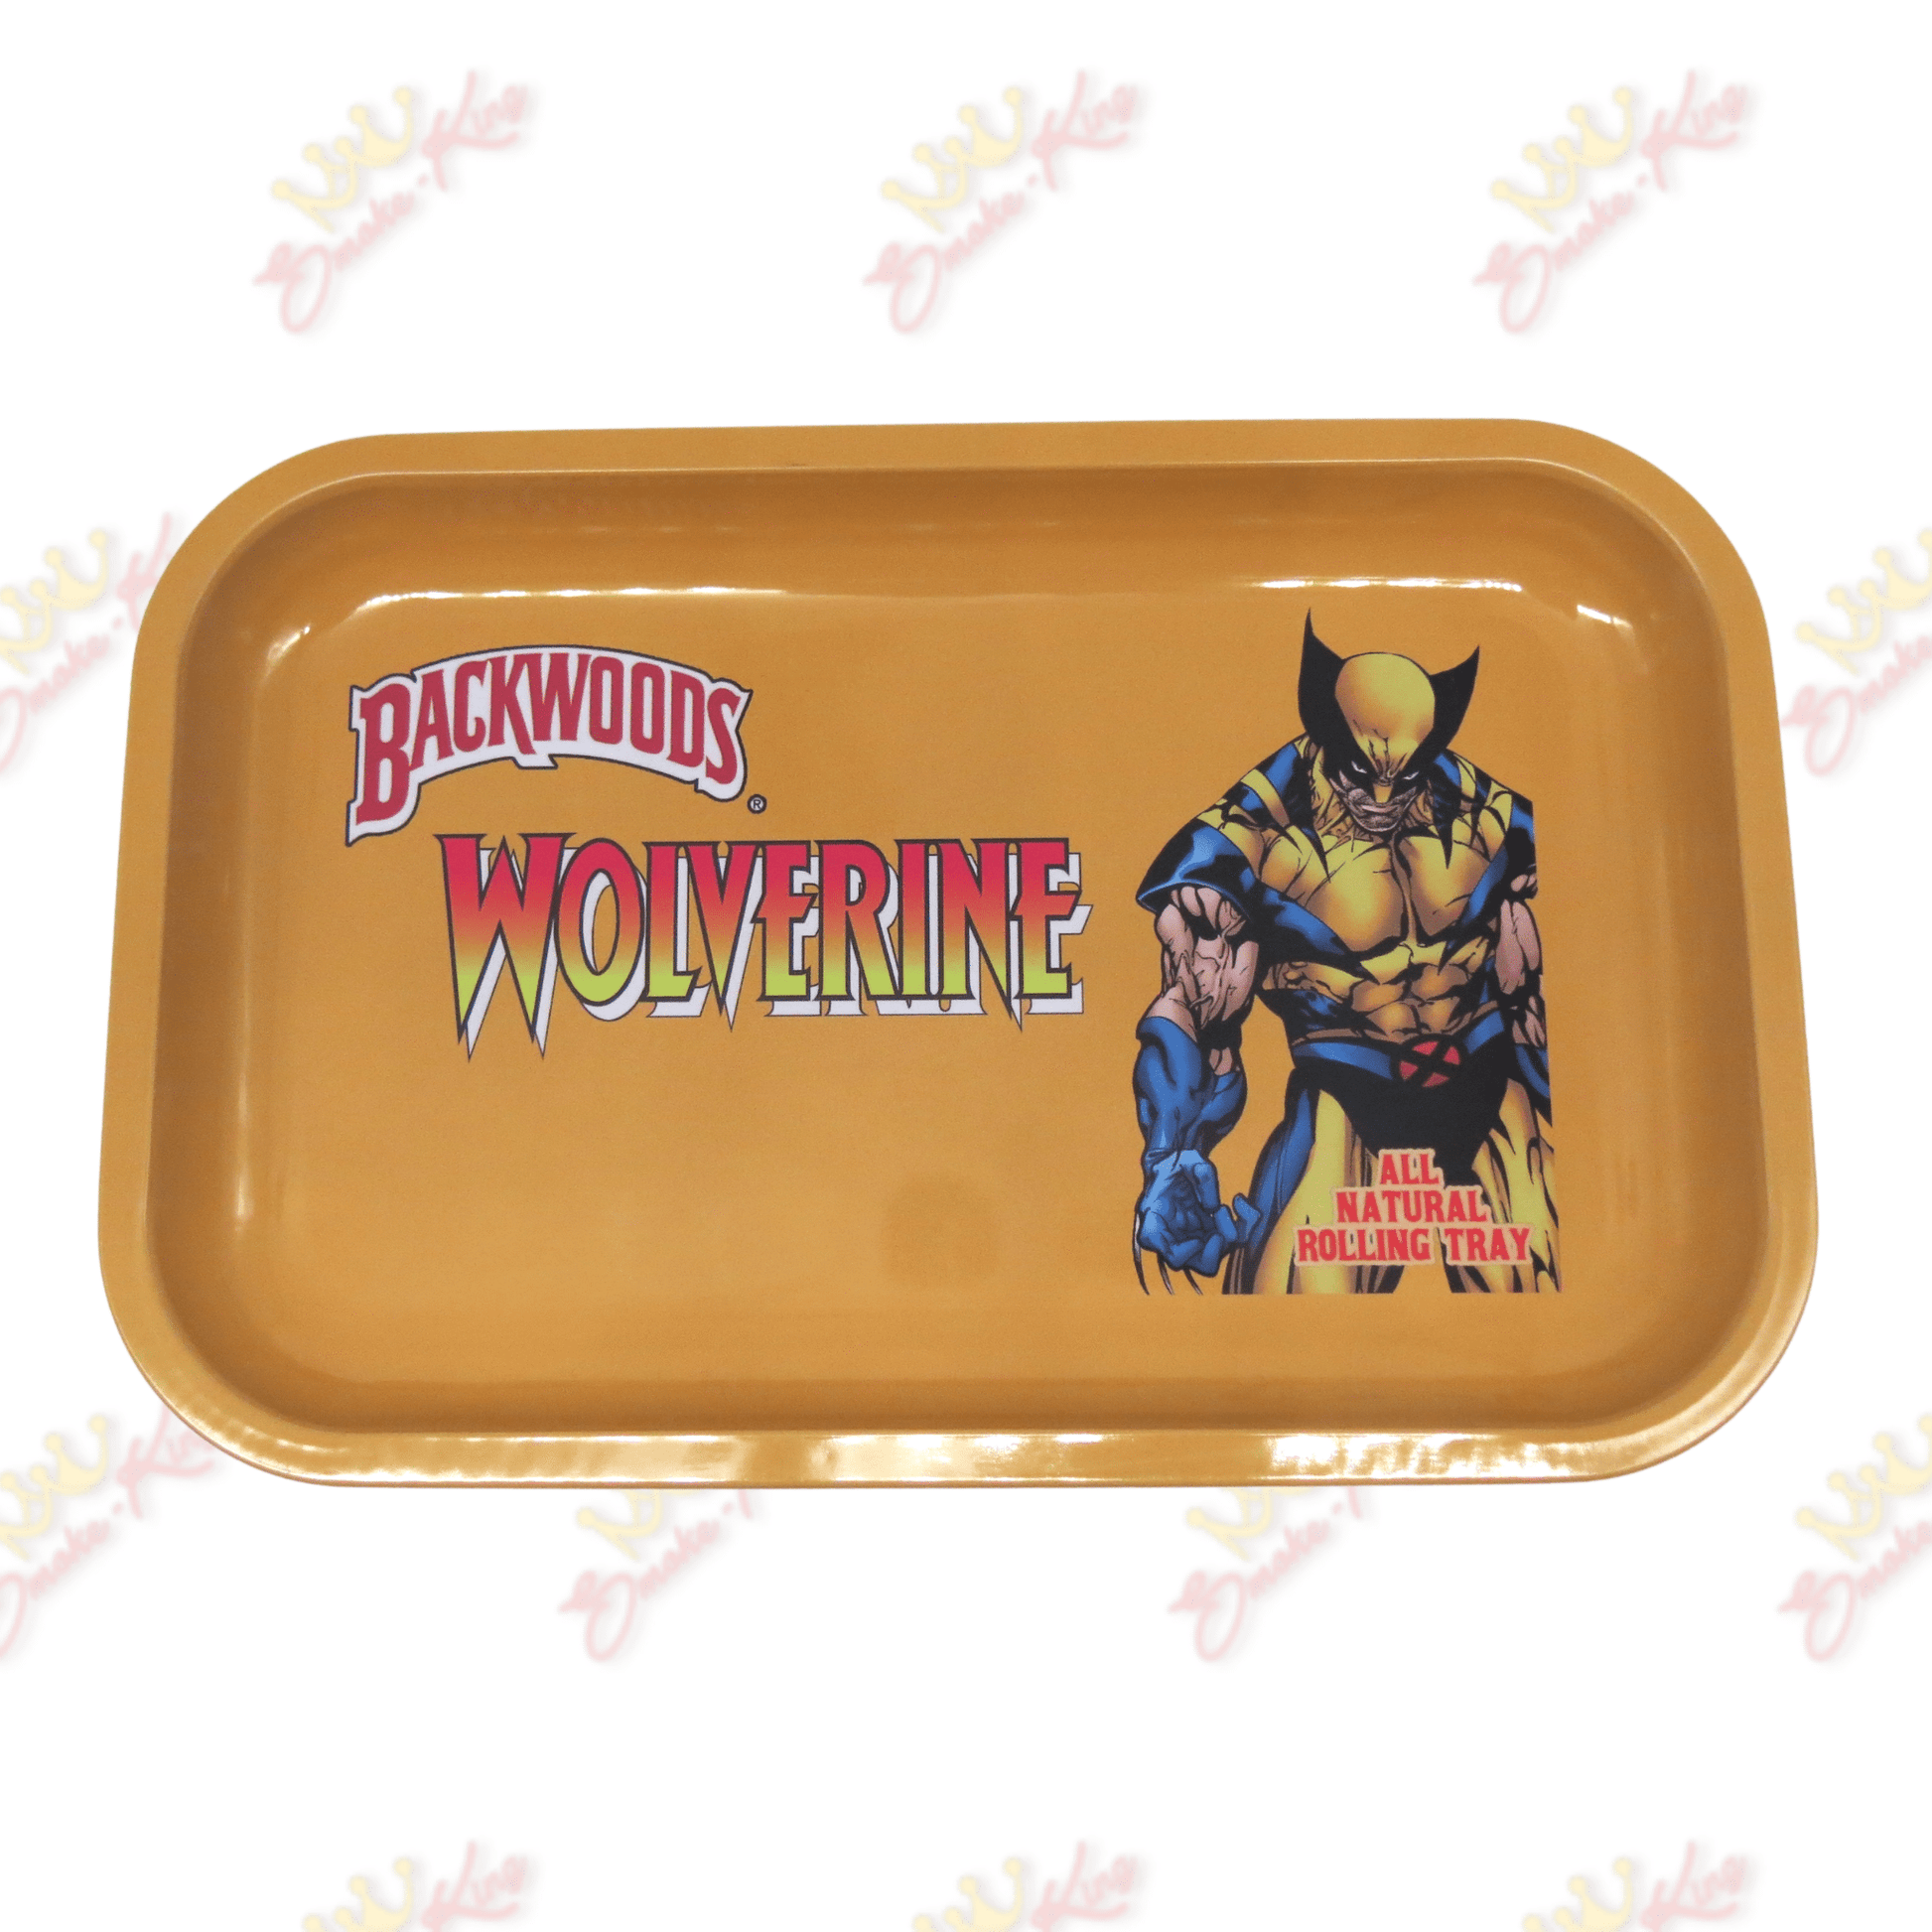 Black Panther Rolling Tray